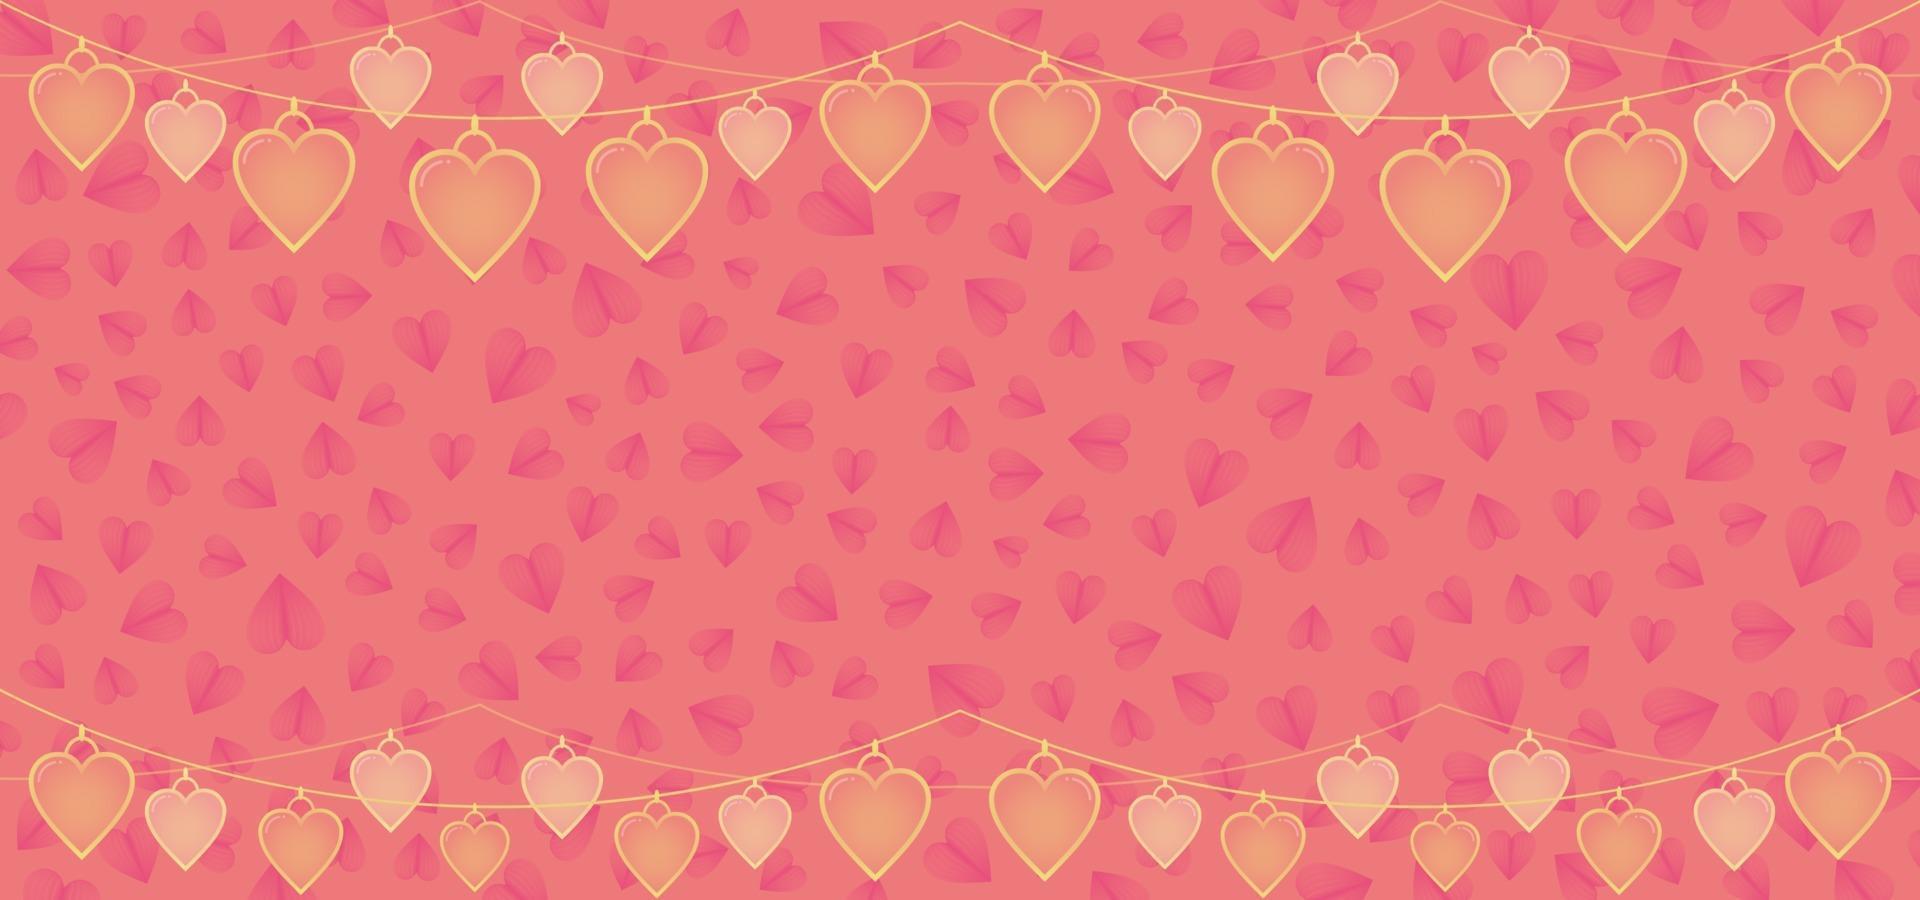 Valentine background with with heart hanging decoration vector